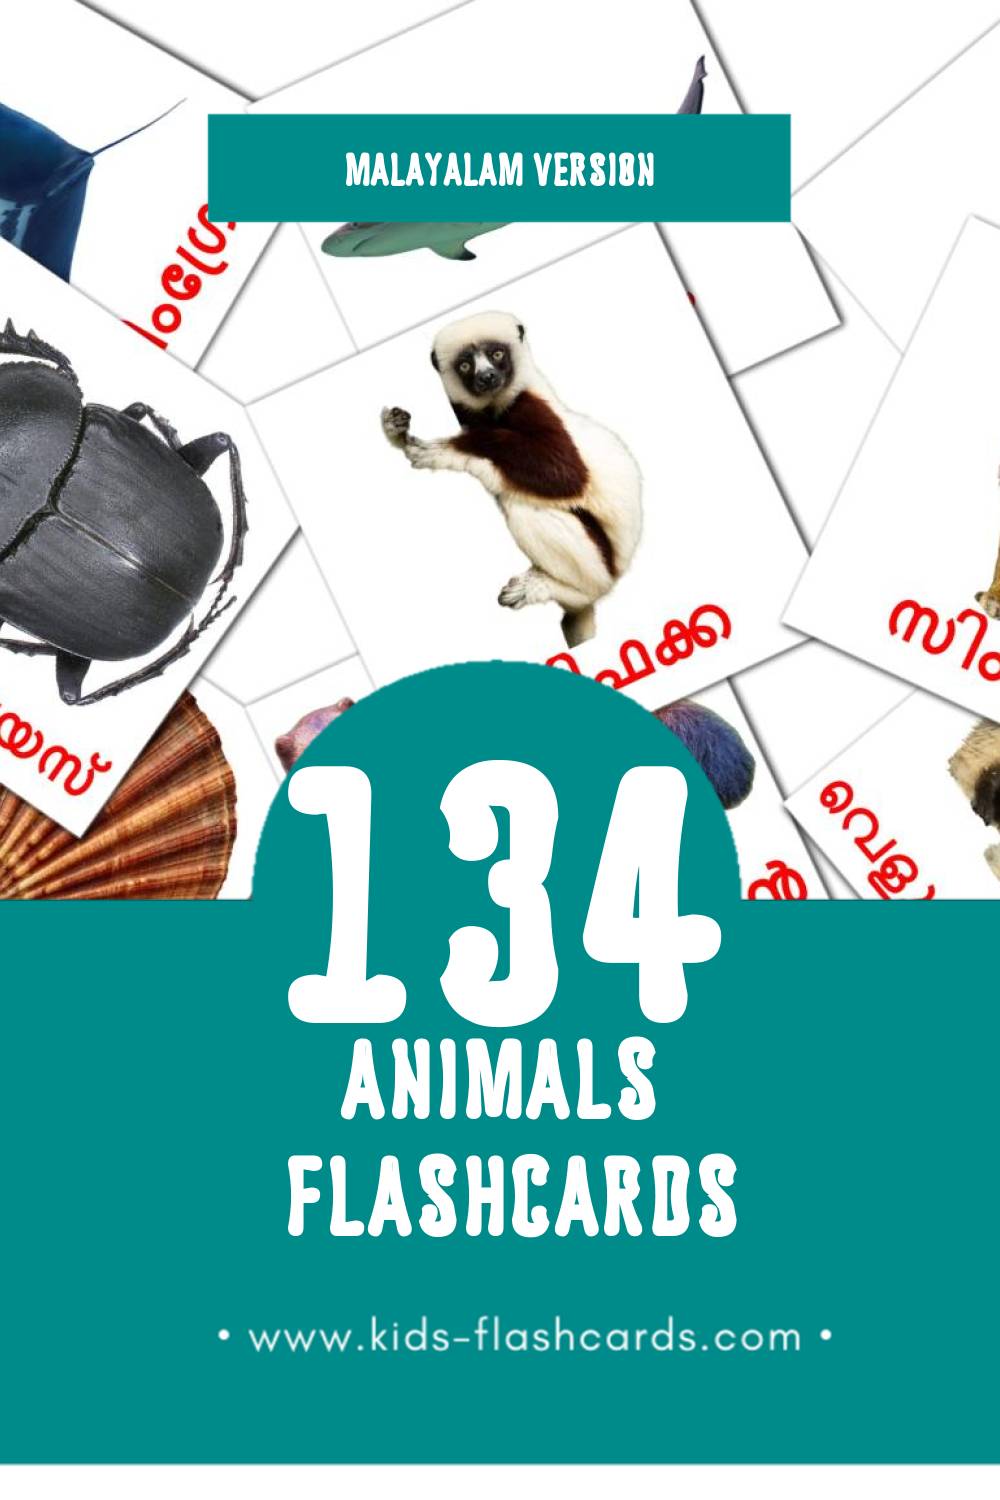 Visual മൃഗങ്ങൾ Flashcards for Toddlers (134 cards in Malayalam)